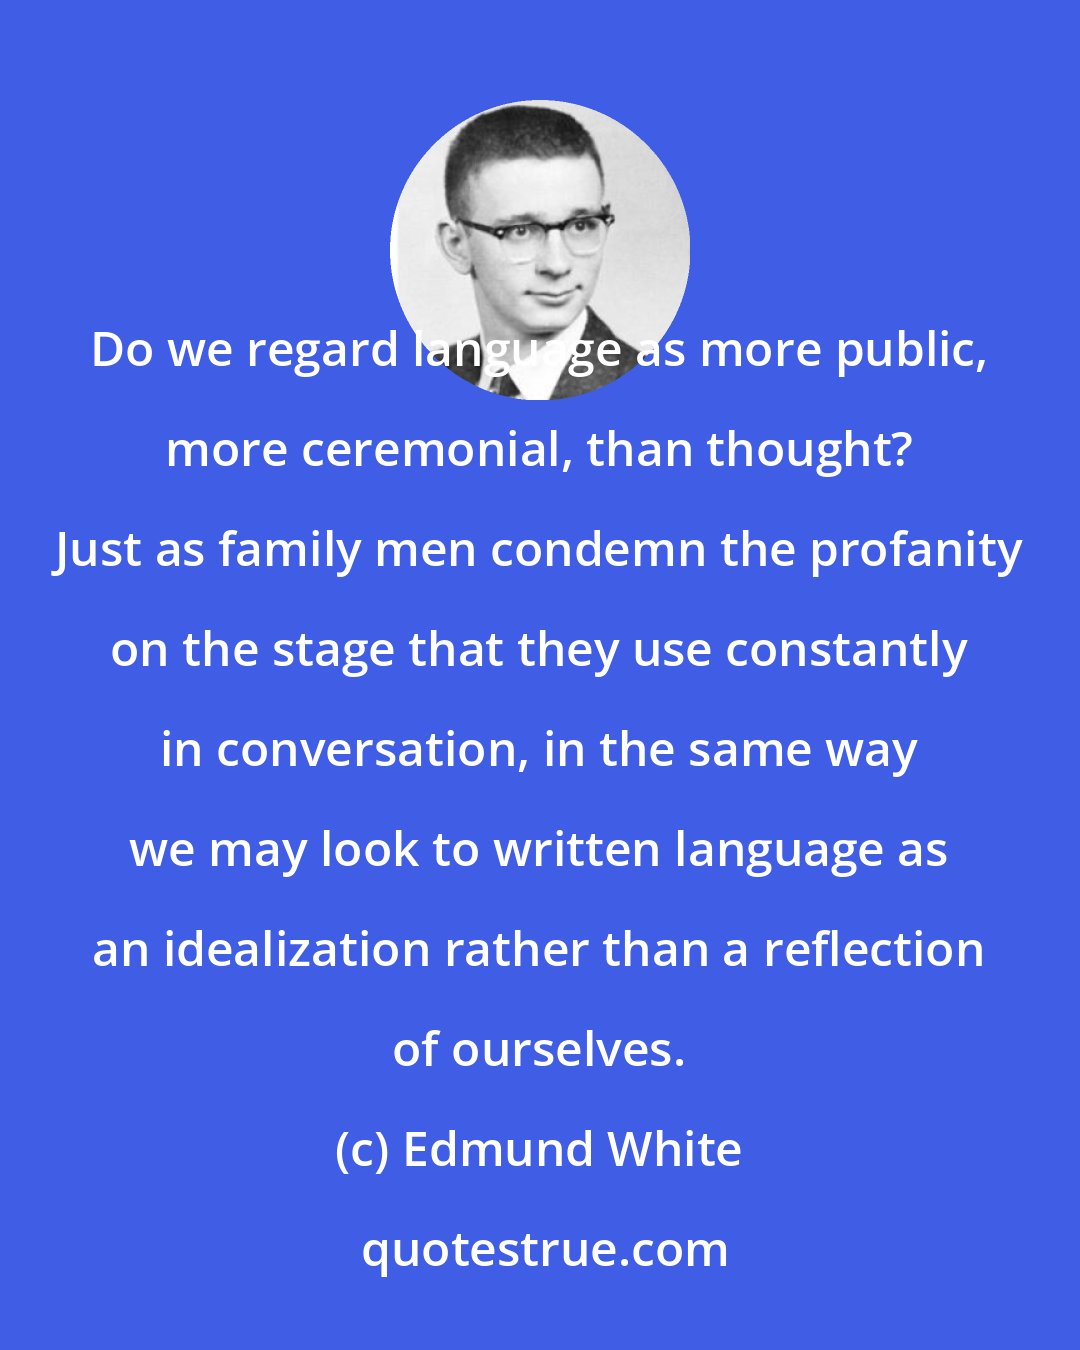 Edmund White: Do we regard language as more public, more ceremonial, than thought? Just as family men condemn the profanity on the stage that they use constantly in conversation, in the same way we may look to written language as an idealization rather than a reflection of ourselves.